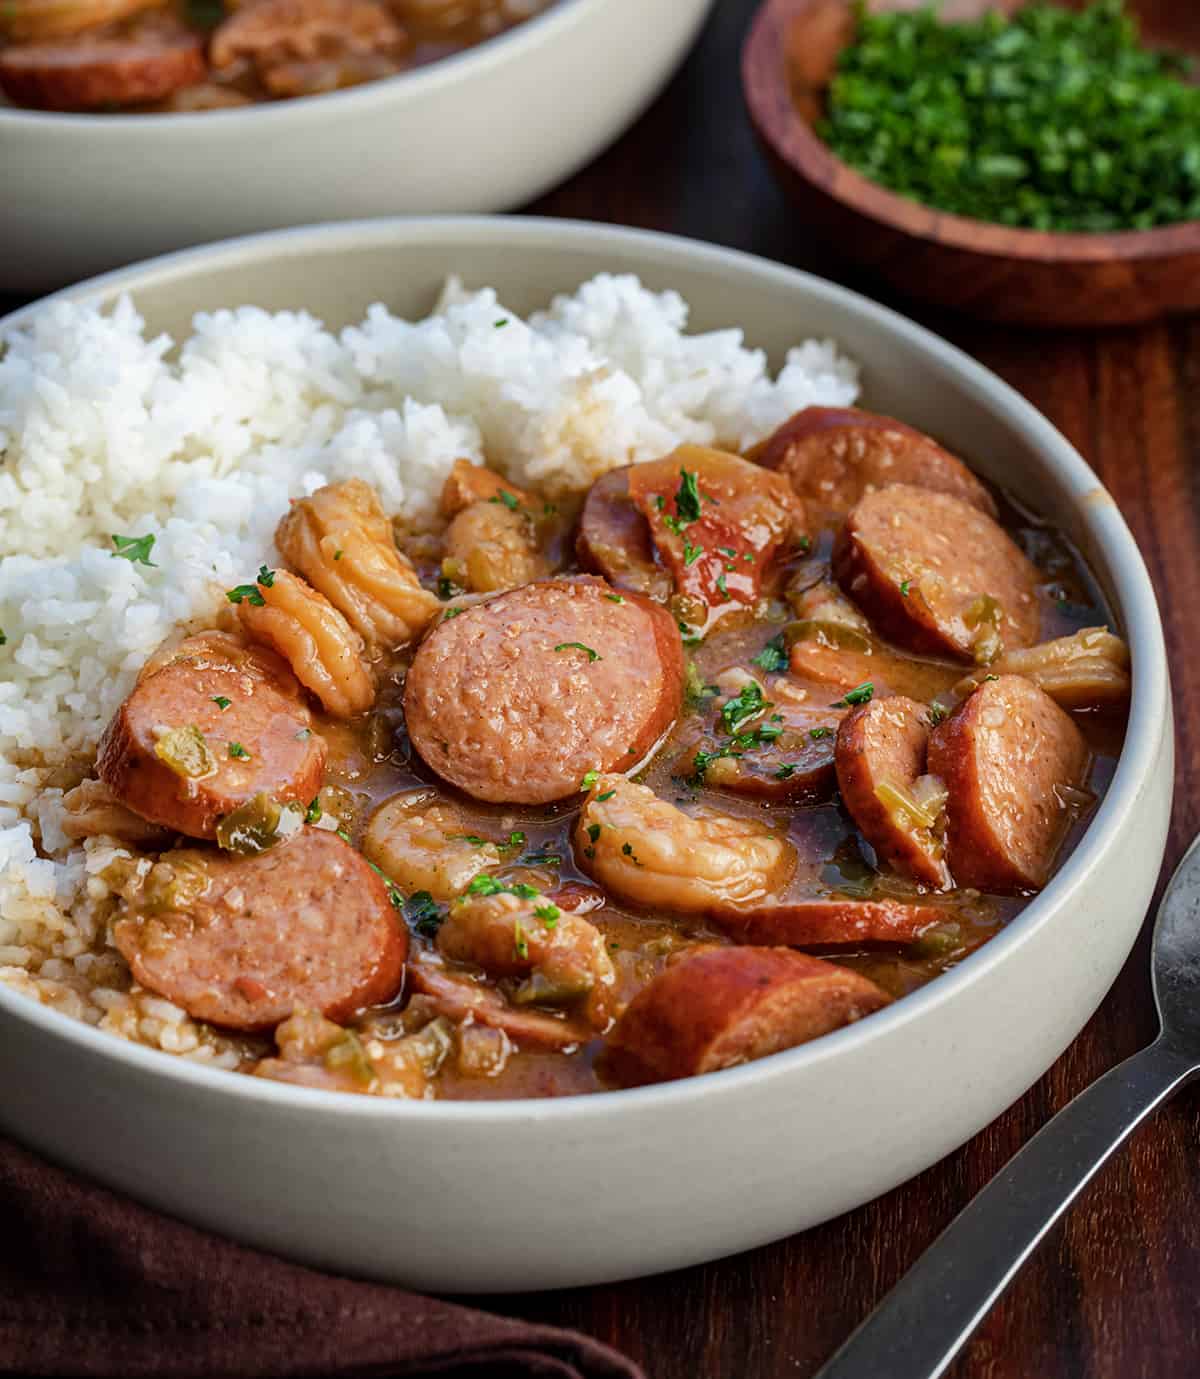 Bowls of Gumbo with Rice.